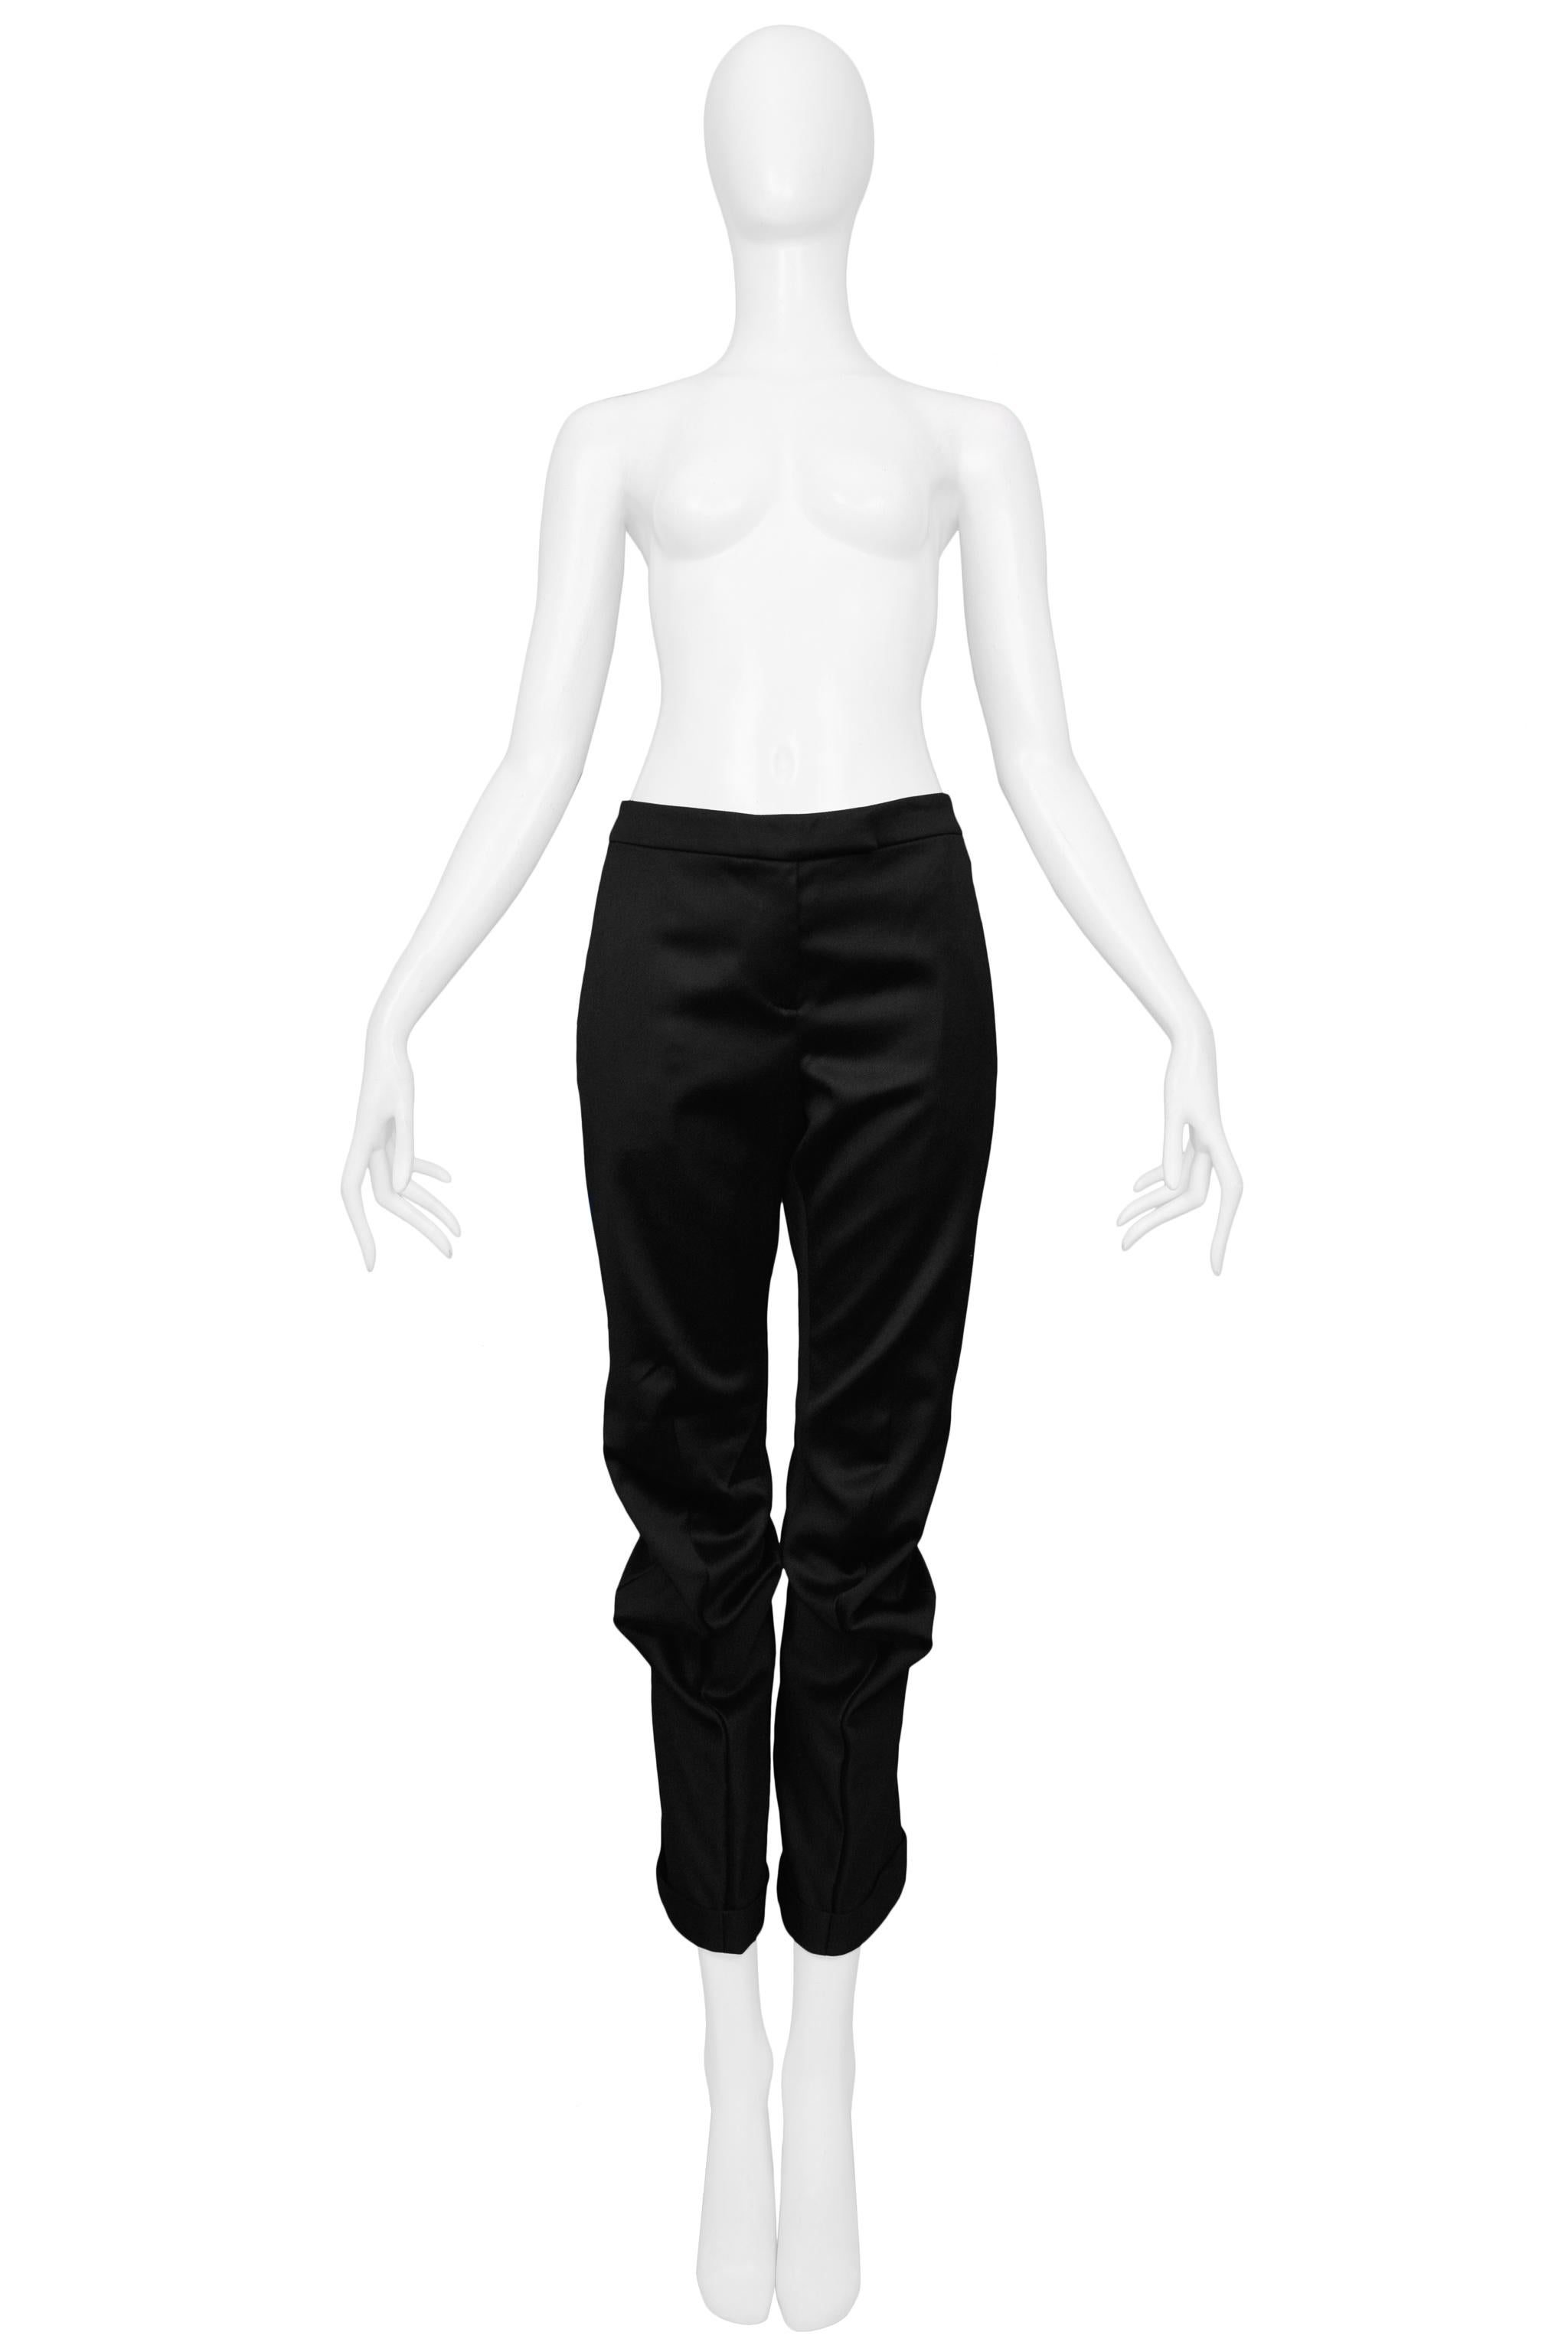 Resurrection Vintage is excited to present a pair of vintage Alexander McQueen black pants featuring curved front seams at the knees, zipper front, and cuffs at the hem. 

Alexander McQueen
Size: 40
100% Wool 100% Rayon Lining
Excellent Vintage